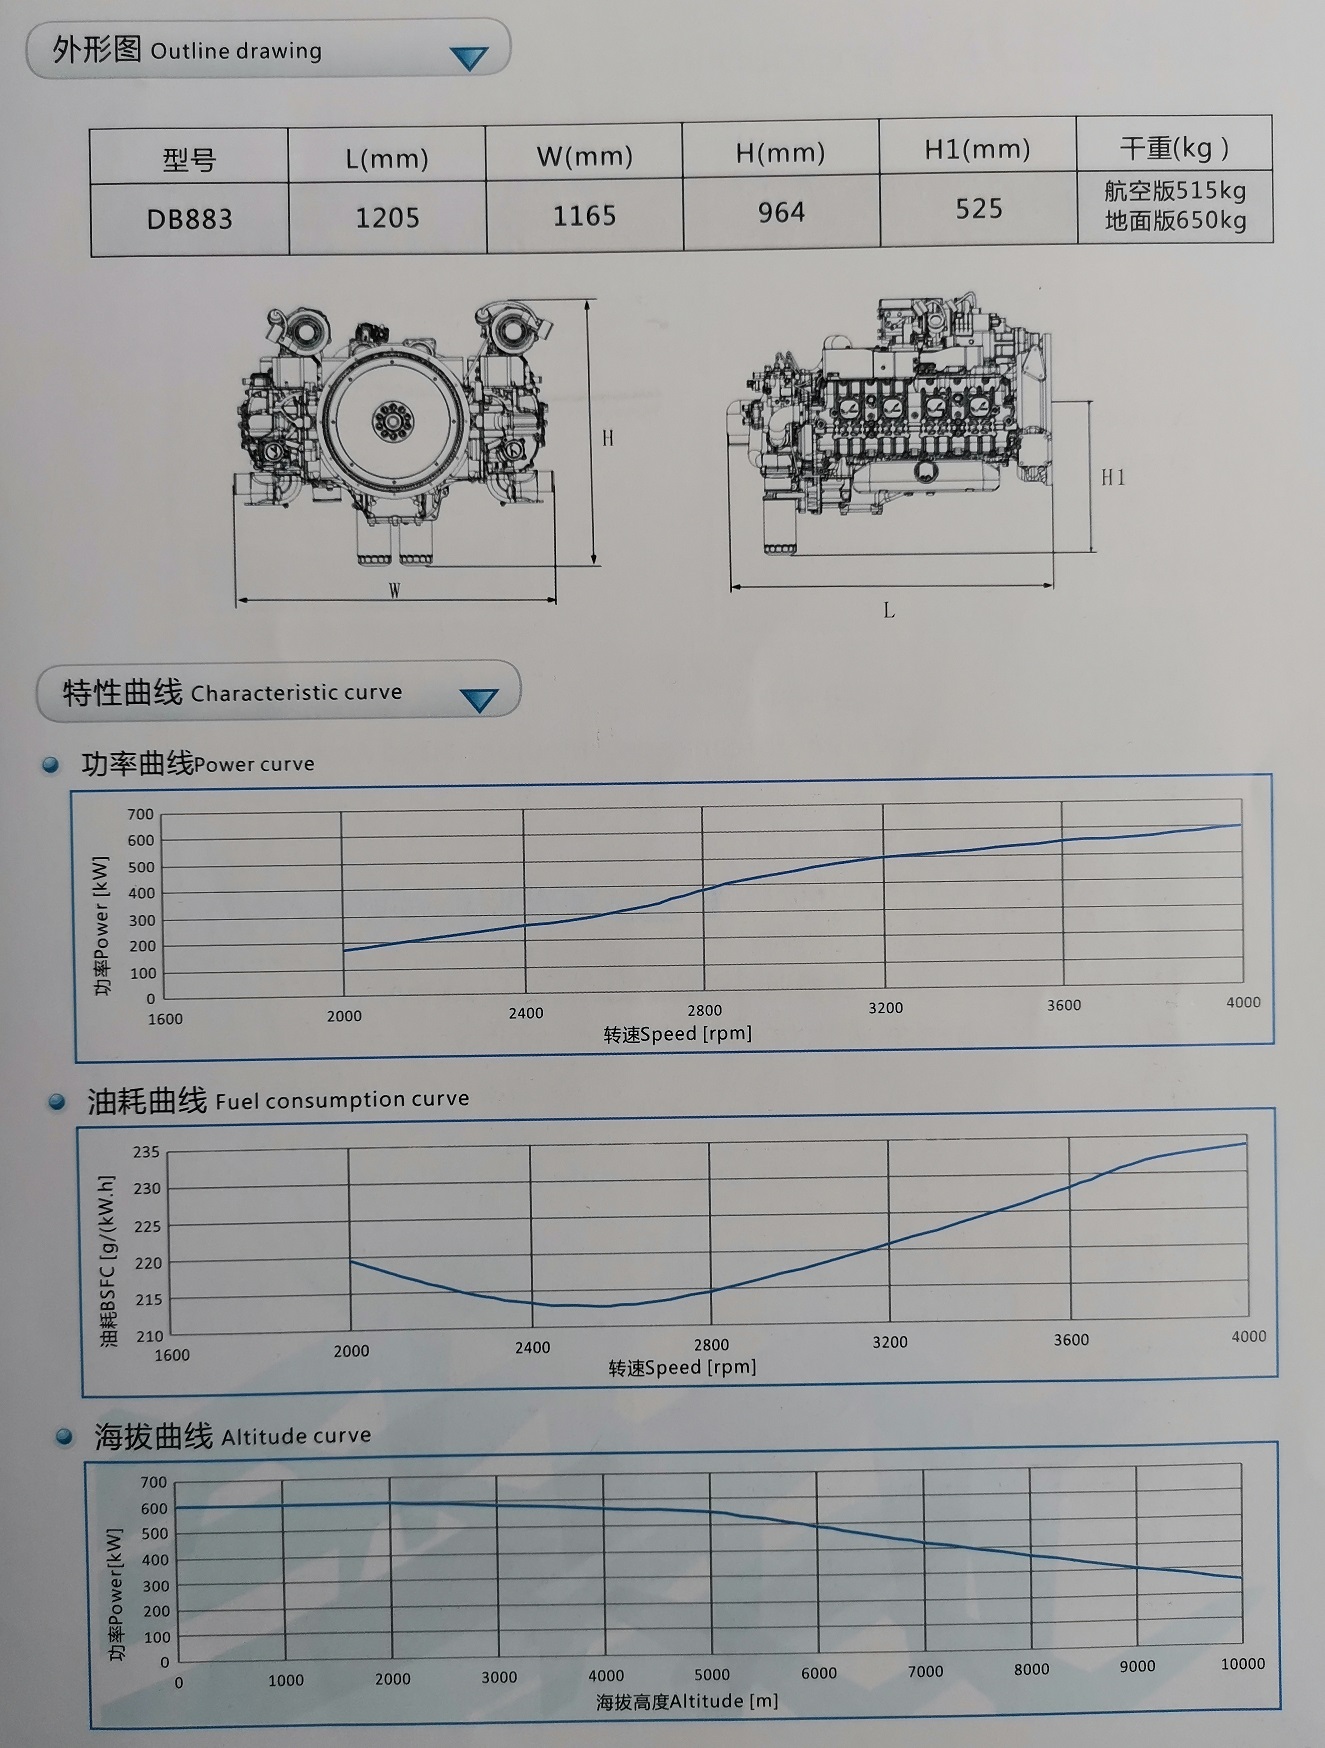 600kW military drone heavy fuel engine characteristic curve